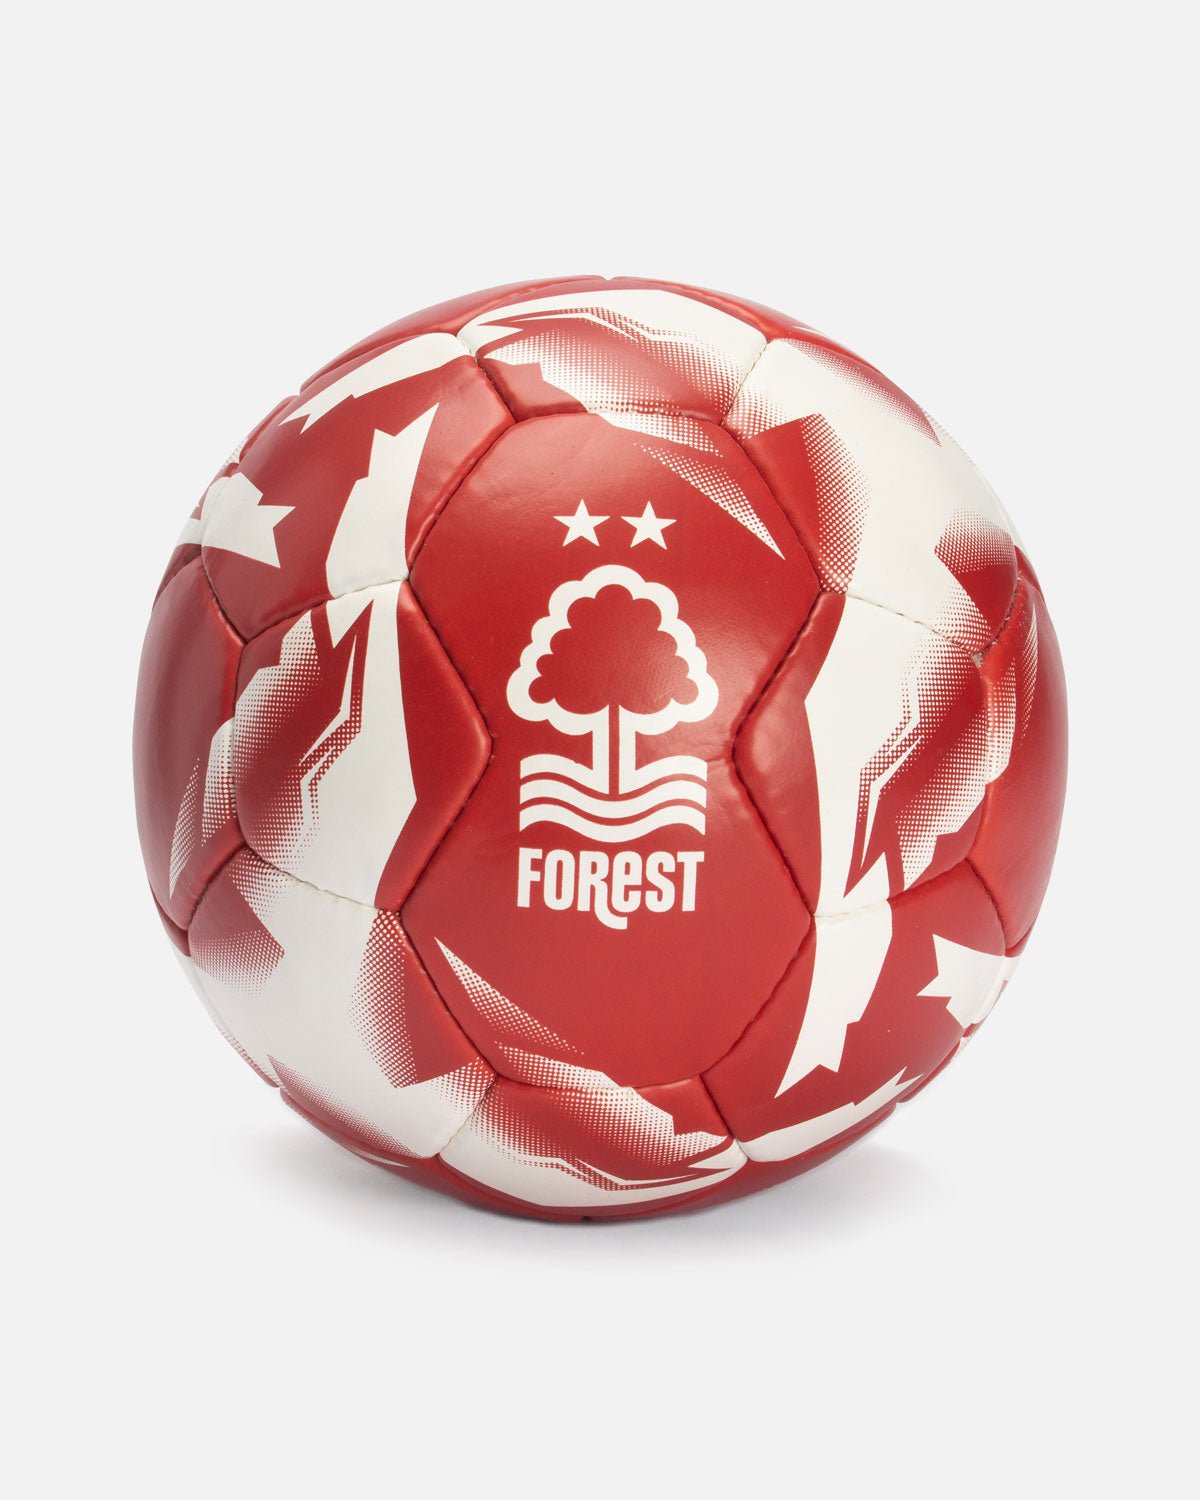 NFFC Matte Red Football - Size 5 - Nottingham Forest FC